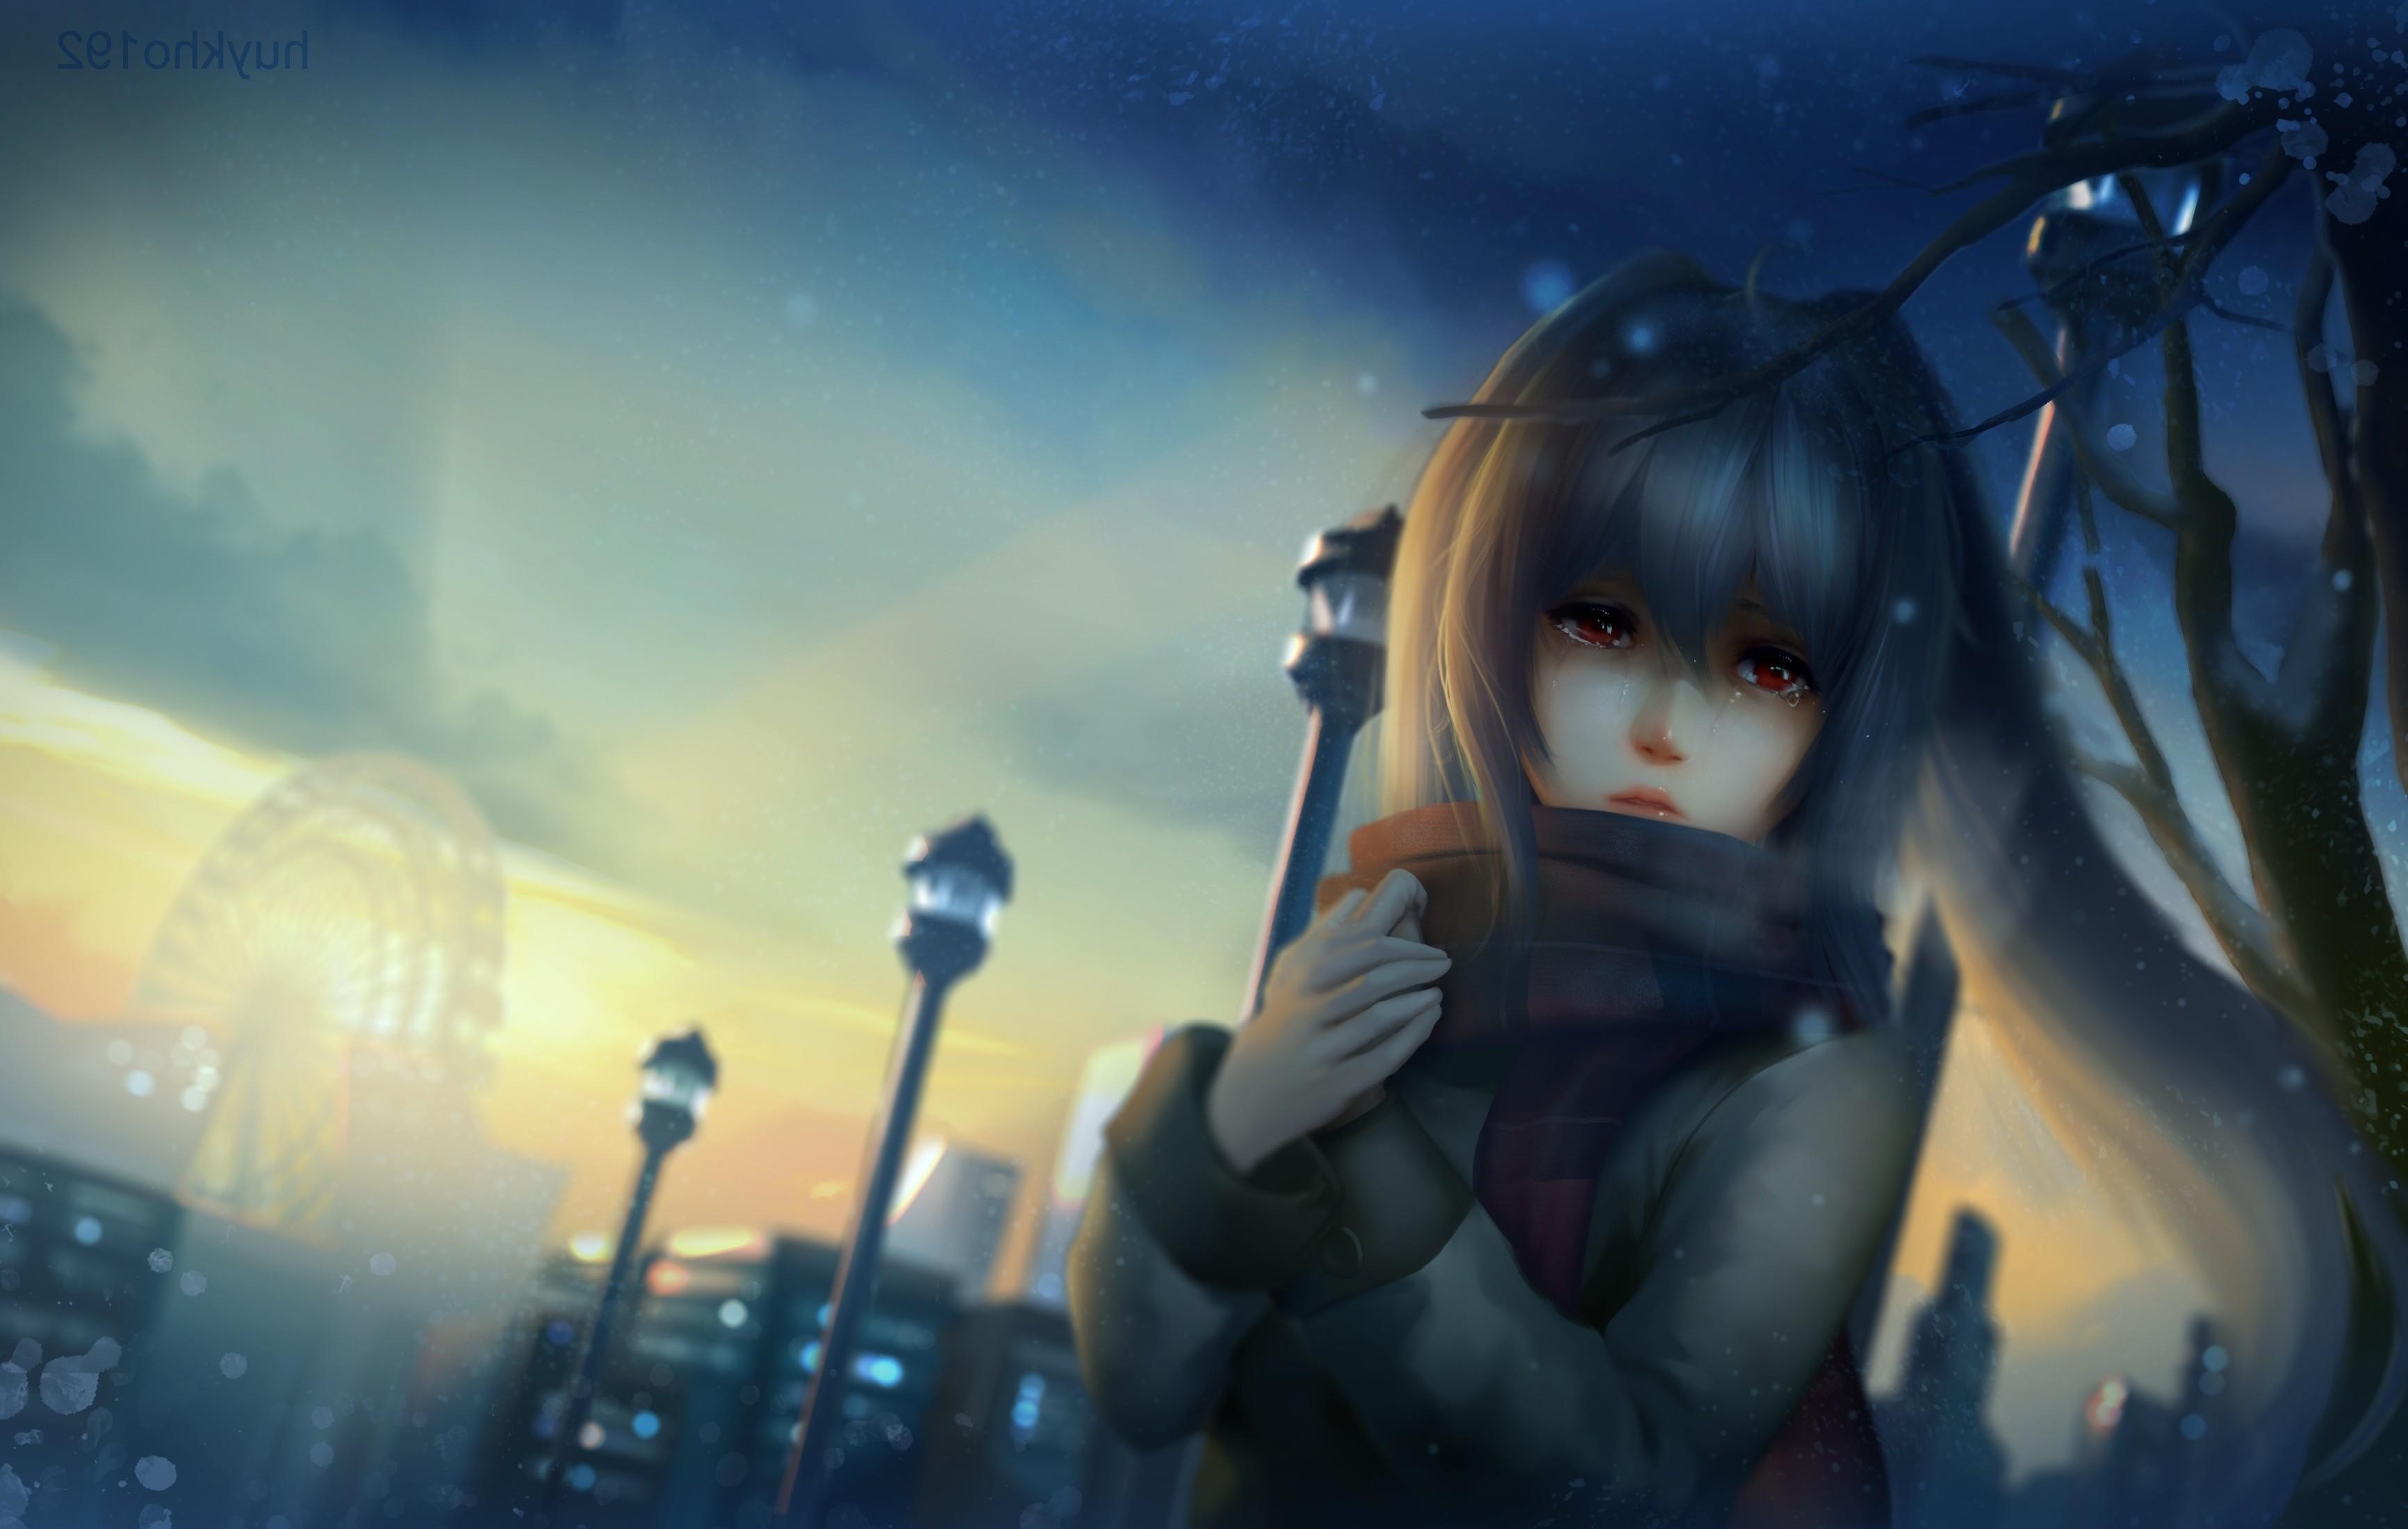 Crying Anime Girl Wallpapers - Wallpaper Cave